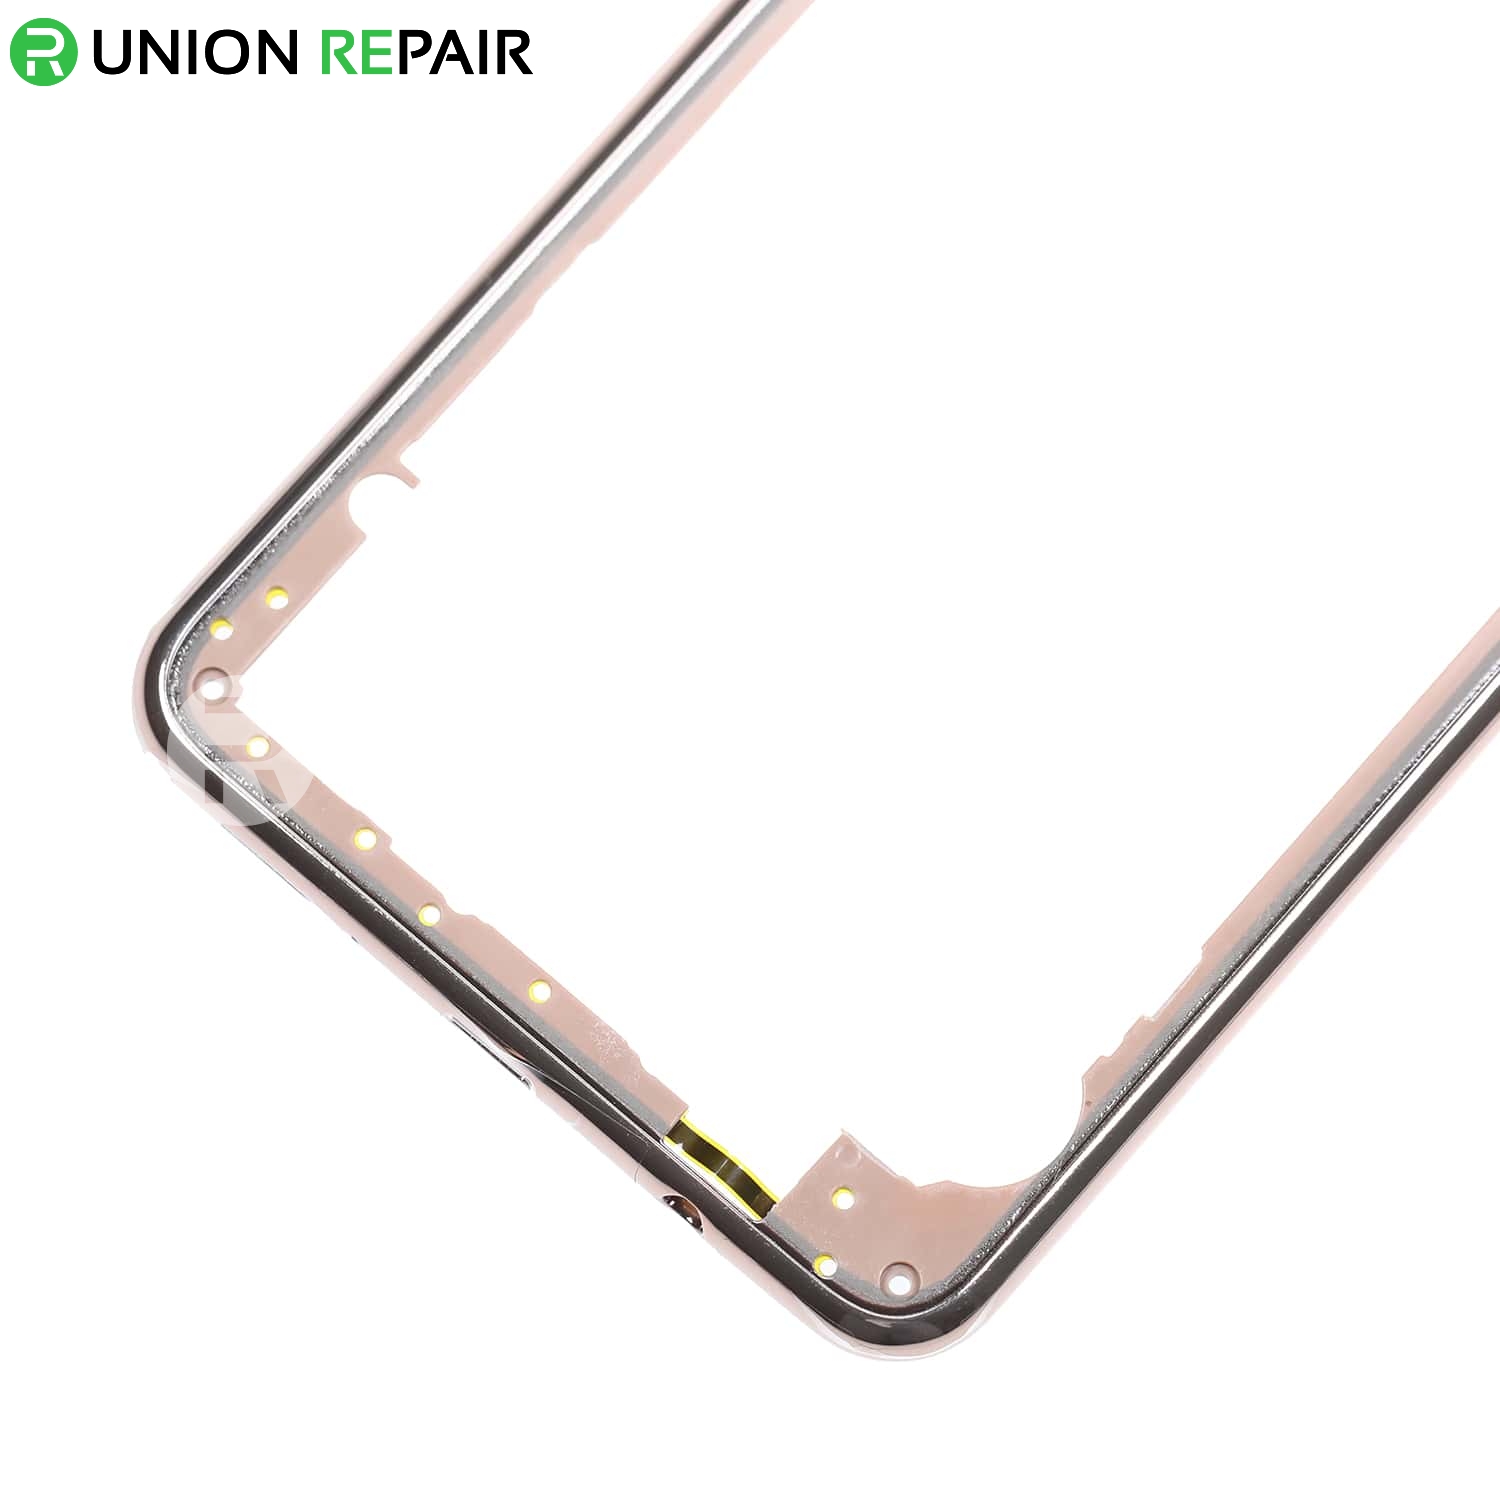 Replacement for Samsung Galaxy A7 (2018) SM-A750 Rear Housing - Gold